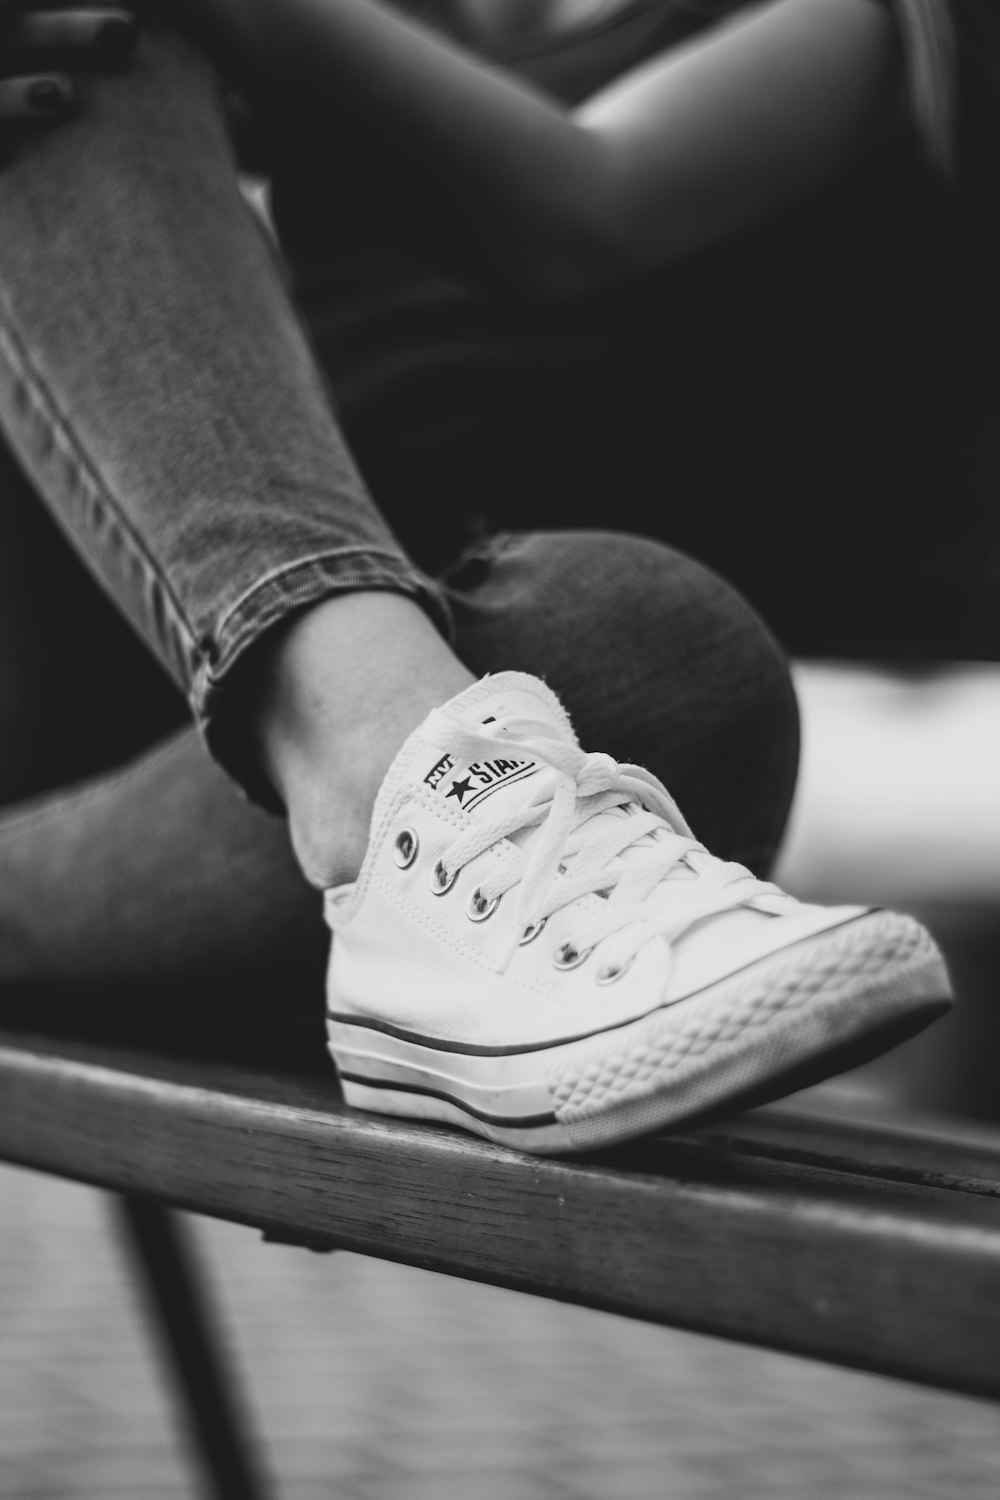 grayscale photo of person in jeans and sneakers